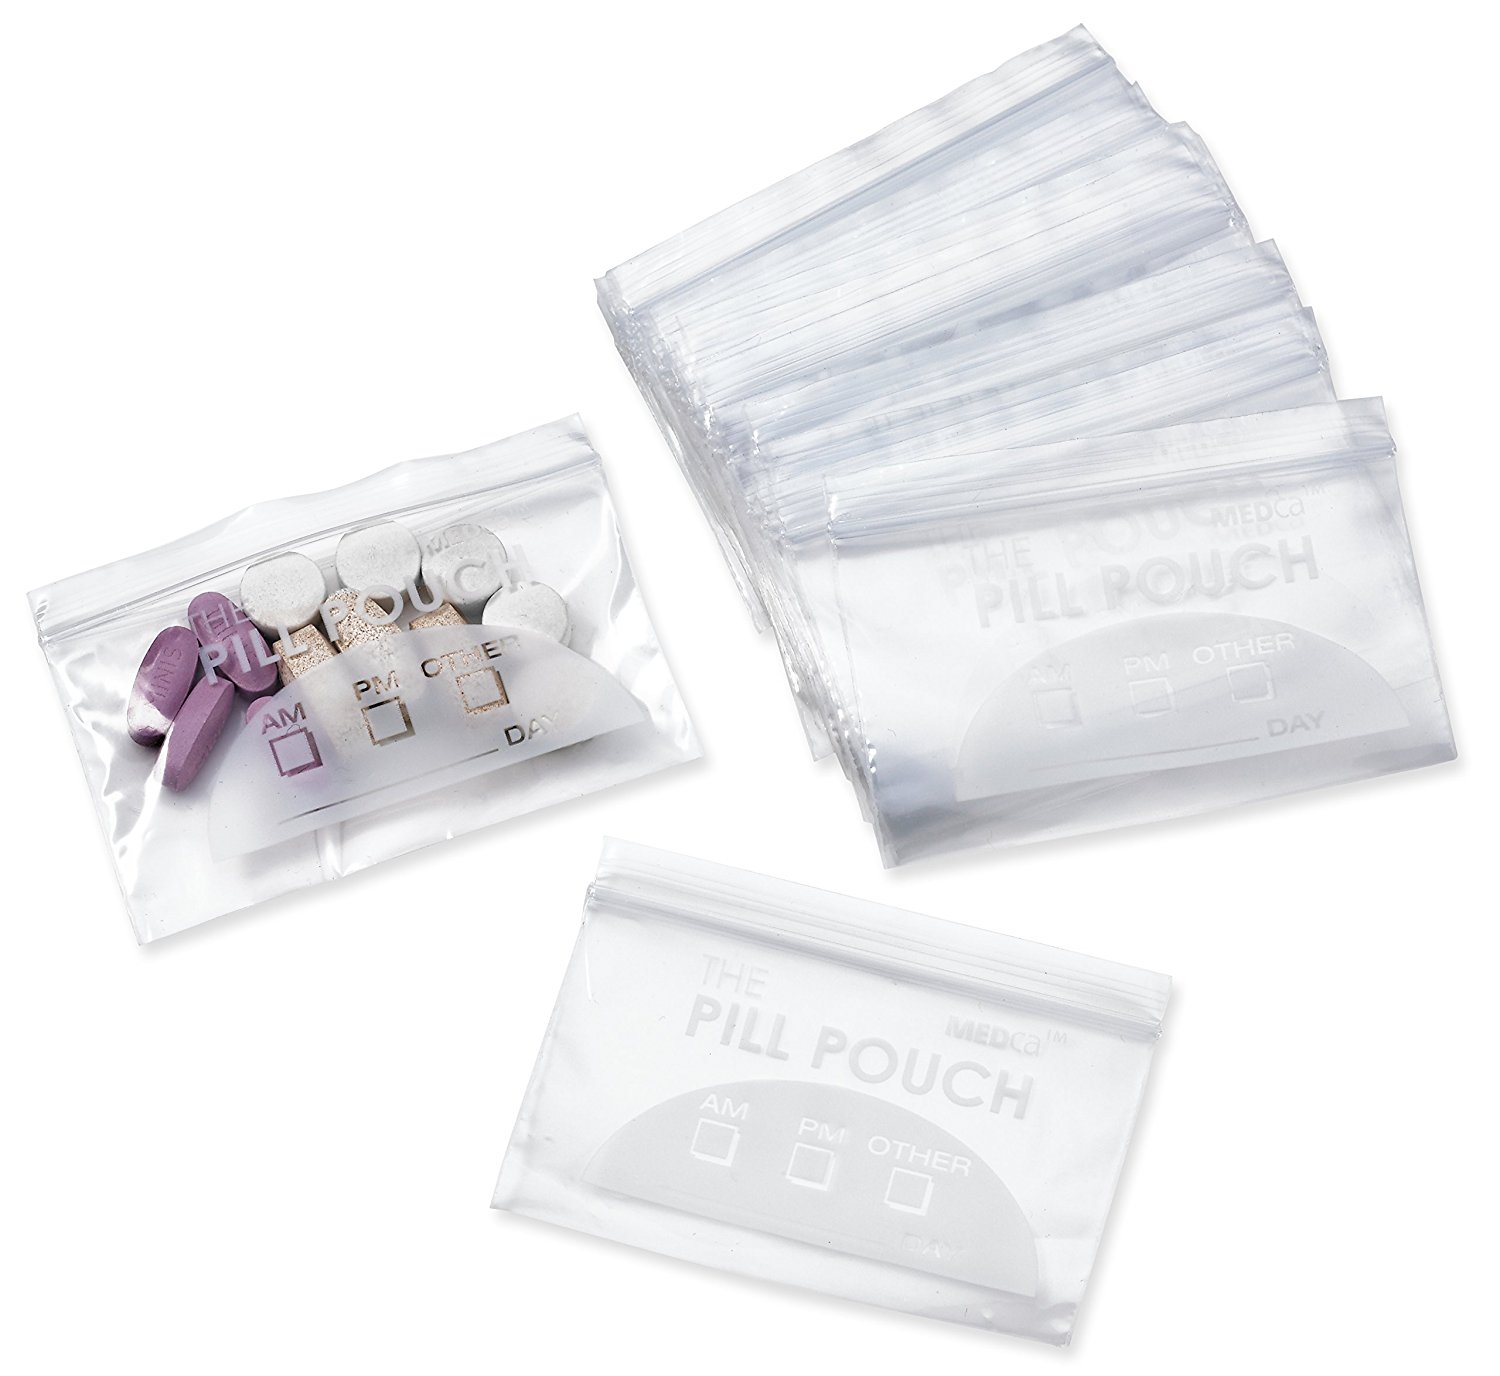 Plastic Pill Travel Organizer Bags With Write-On Labels - 100 Ct